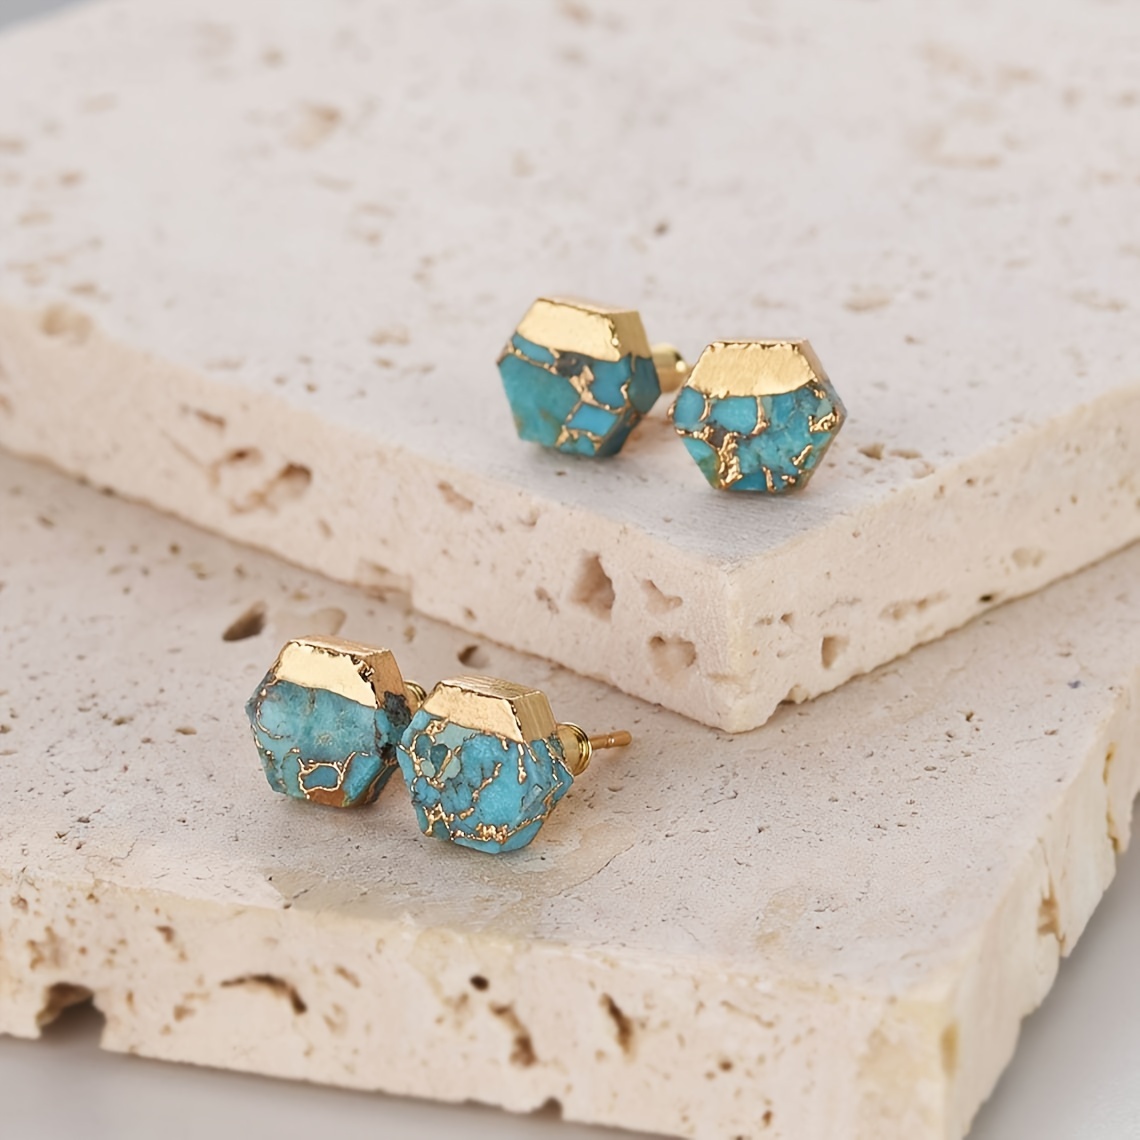 

Bohemian Style Vacation-inspired Earrings, 1 Pair Hexagonal Green Faux Turquoise Studs With Golden Veins, Boho Chic Ear Jewelry